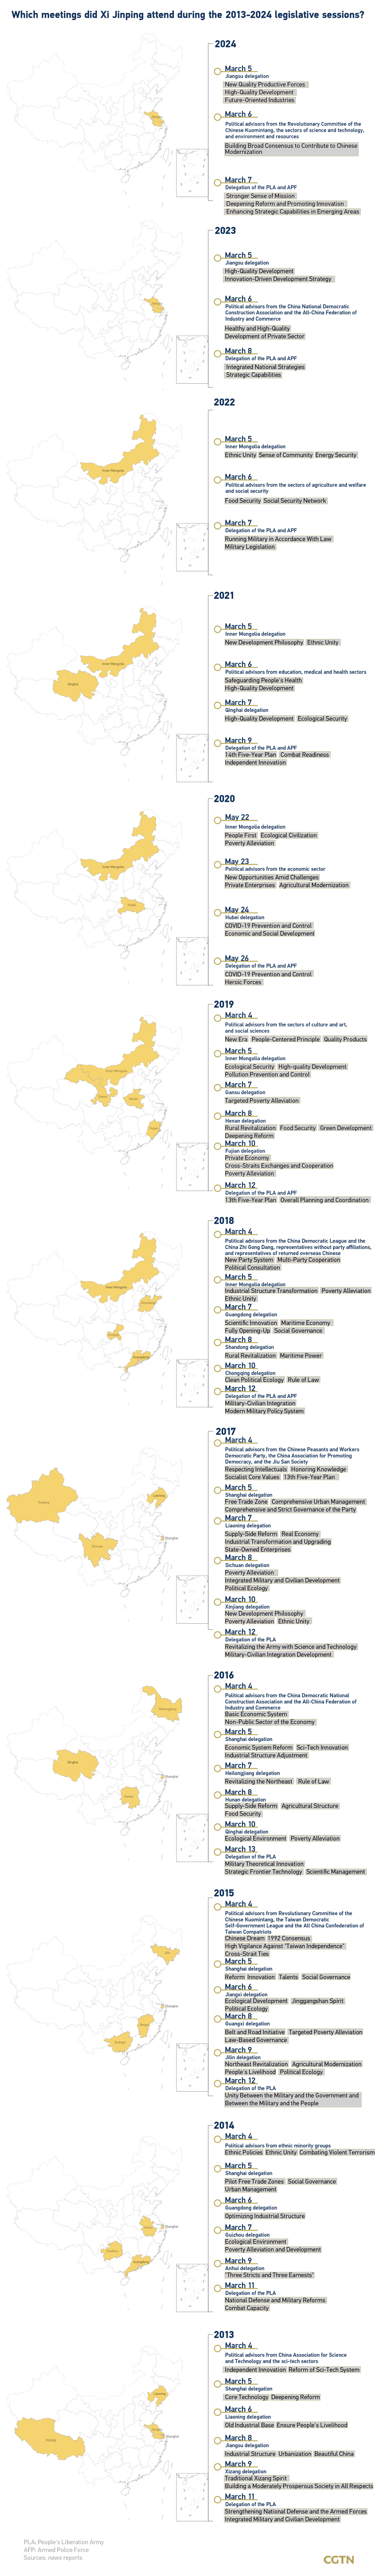 Graphics: President Xi Jinping's participation in legislative sessions 2013-2024